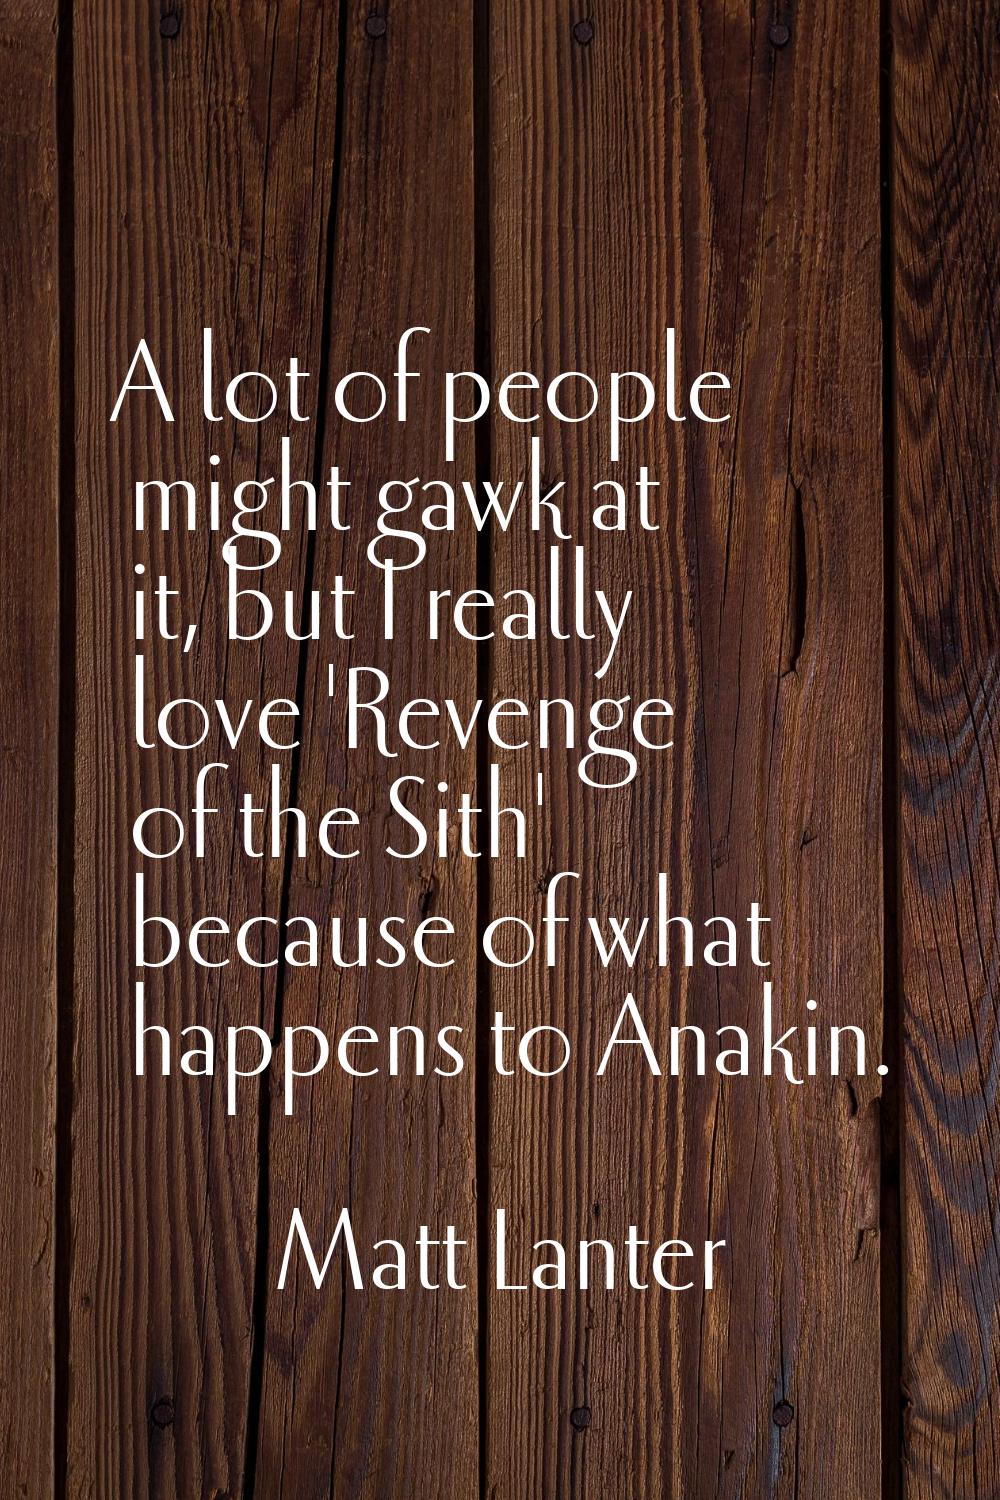 A lot of people might gawk at it, but I really love 'Revenge of the Sith' because of what happens t